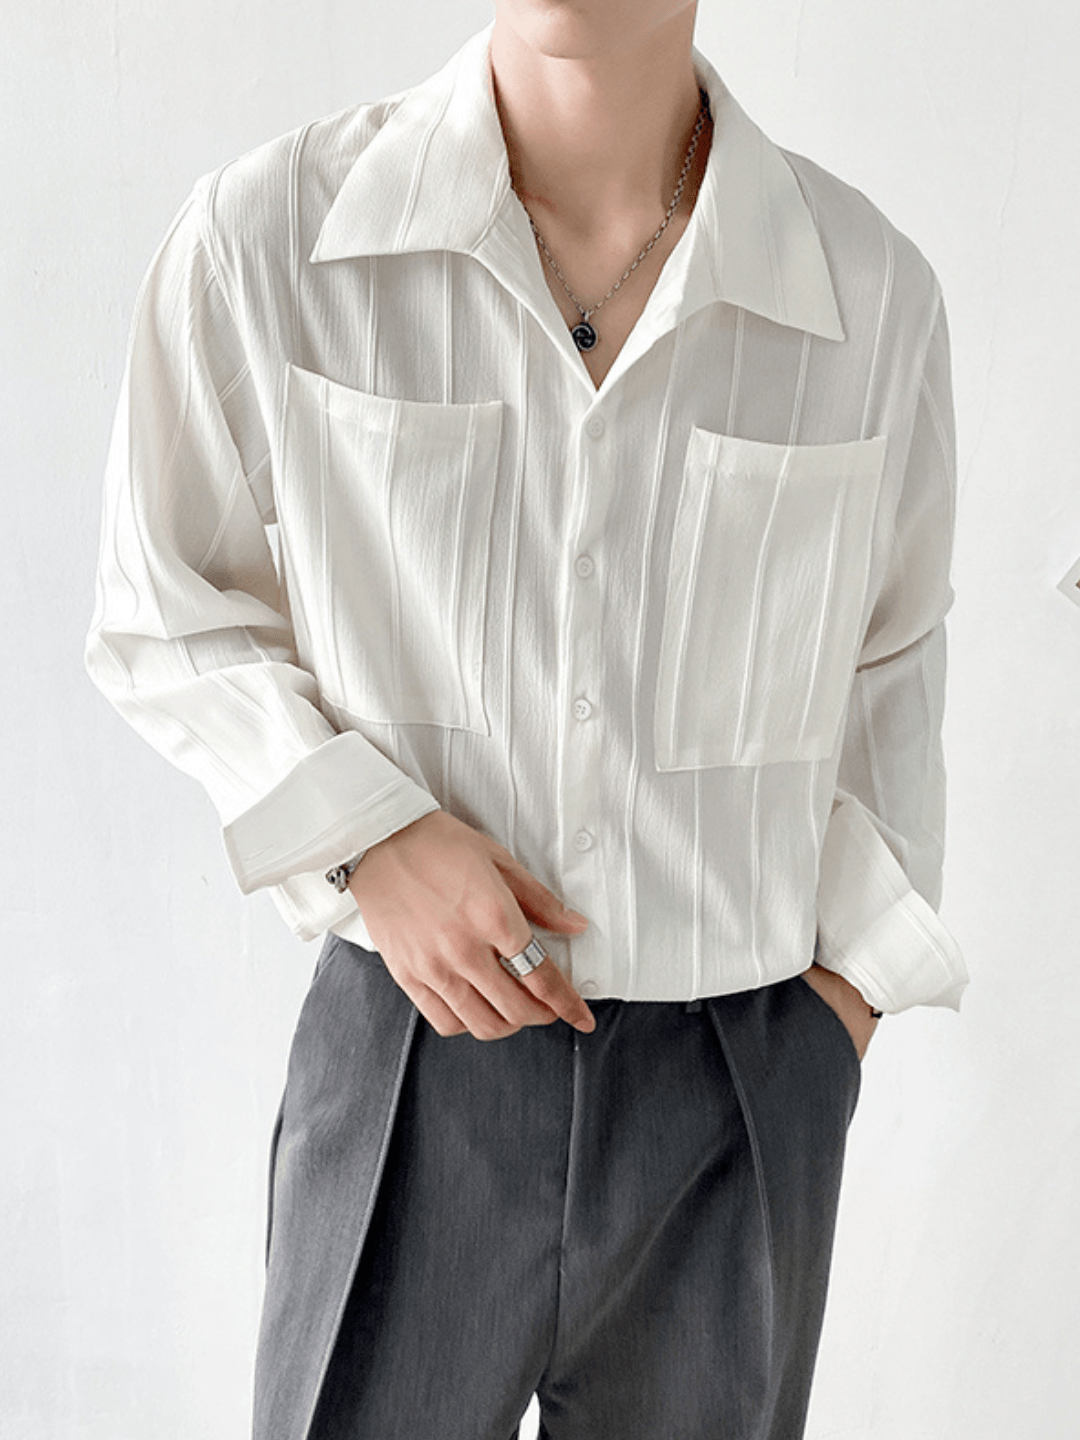 [DAZIONSED] Simple casual shirt na100